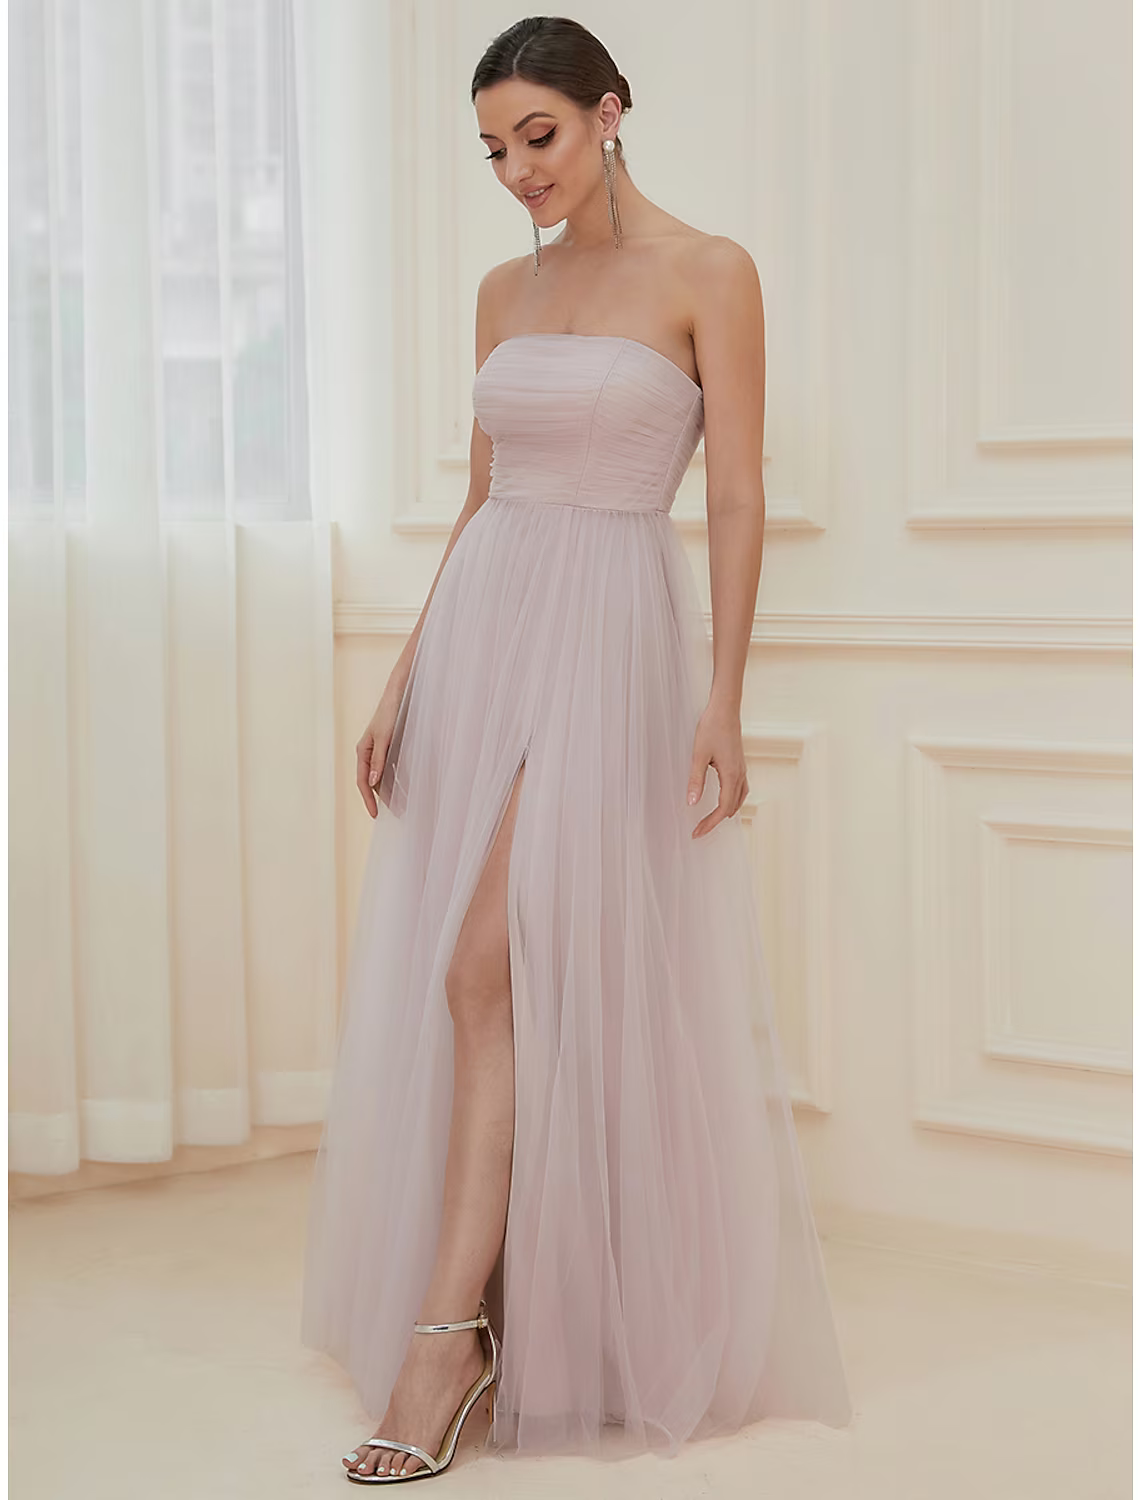 A-Line Evening Gown Elegant Dress Wedding Guest Floor Length Sleeveless Off Shoulder Tulle with Tiered